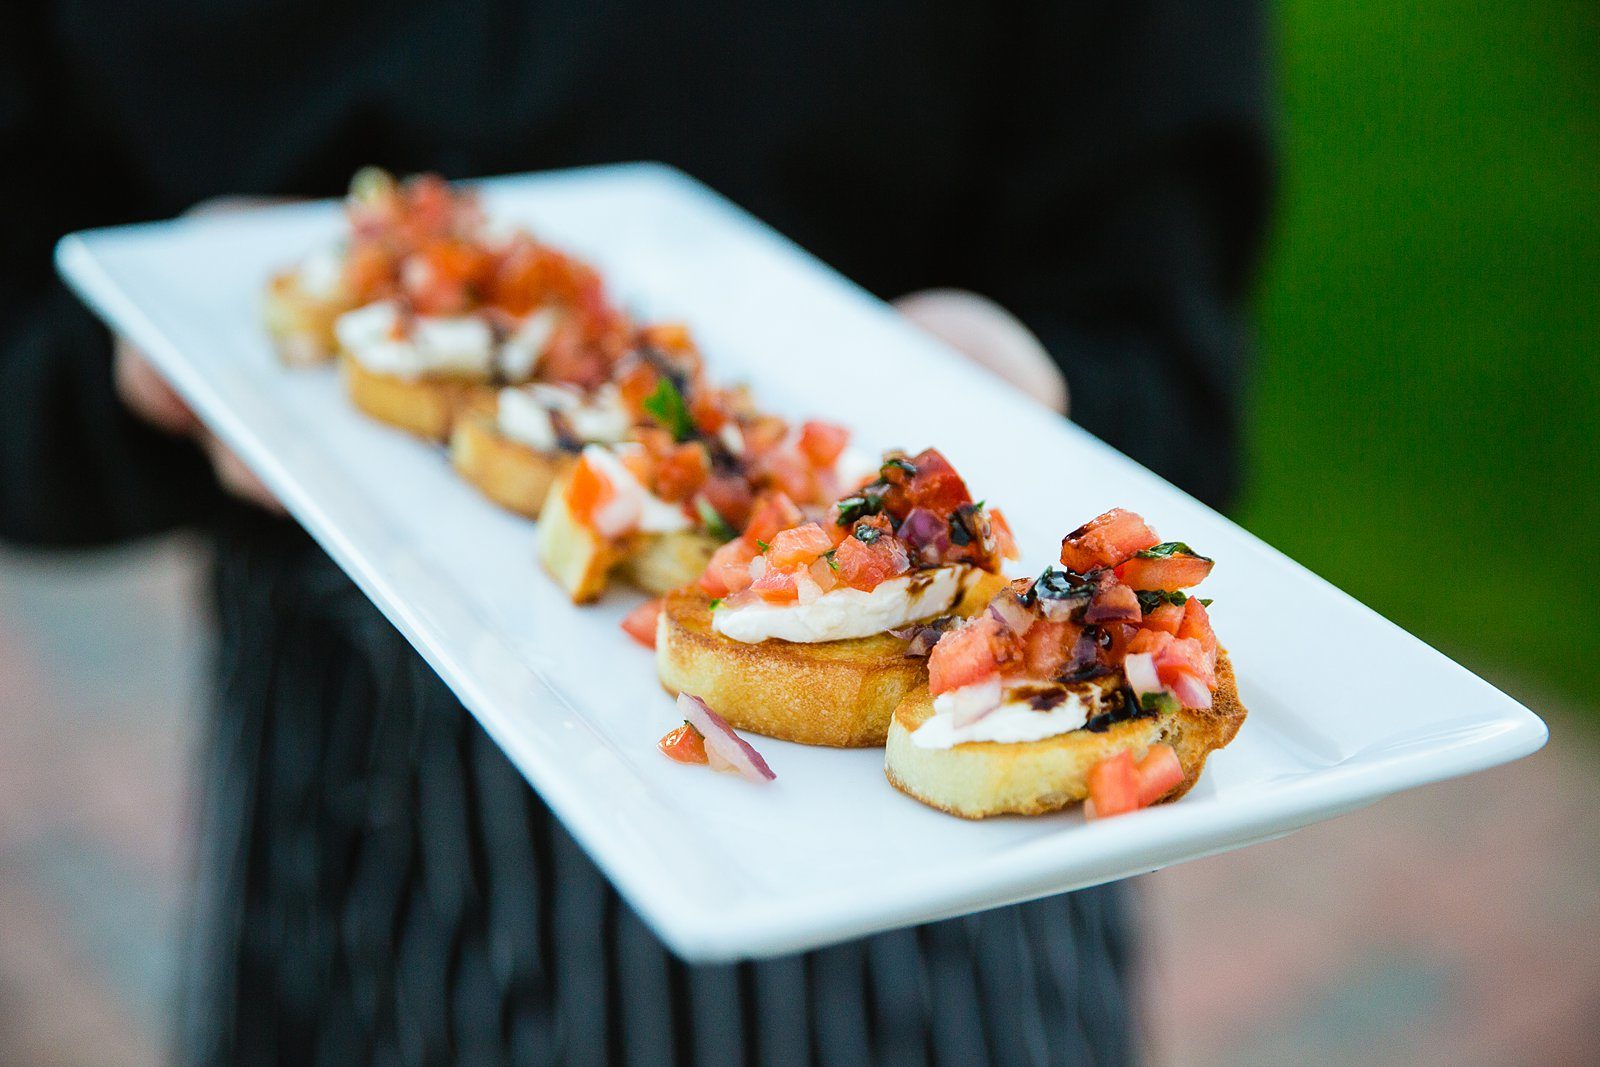 Bruschetta served during cocktail hour by PMA Photography.